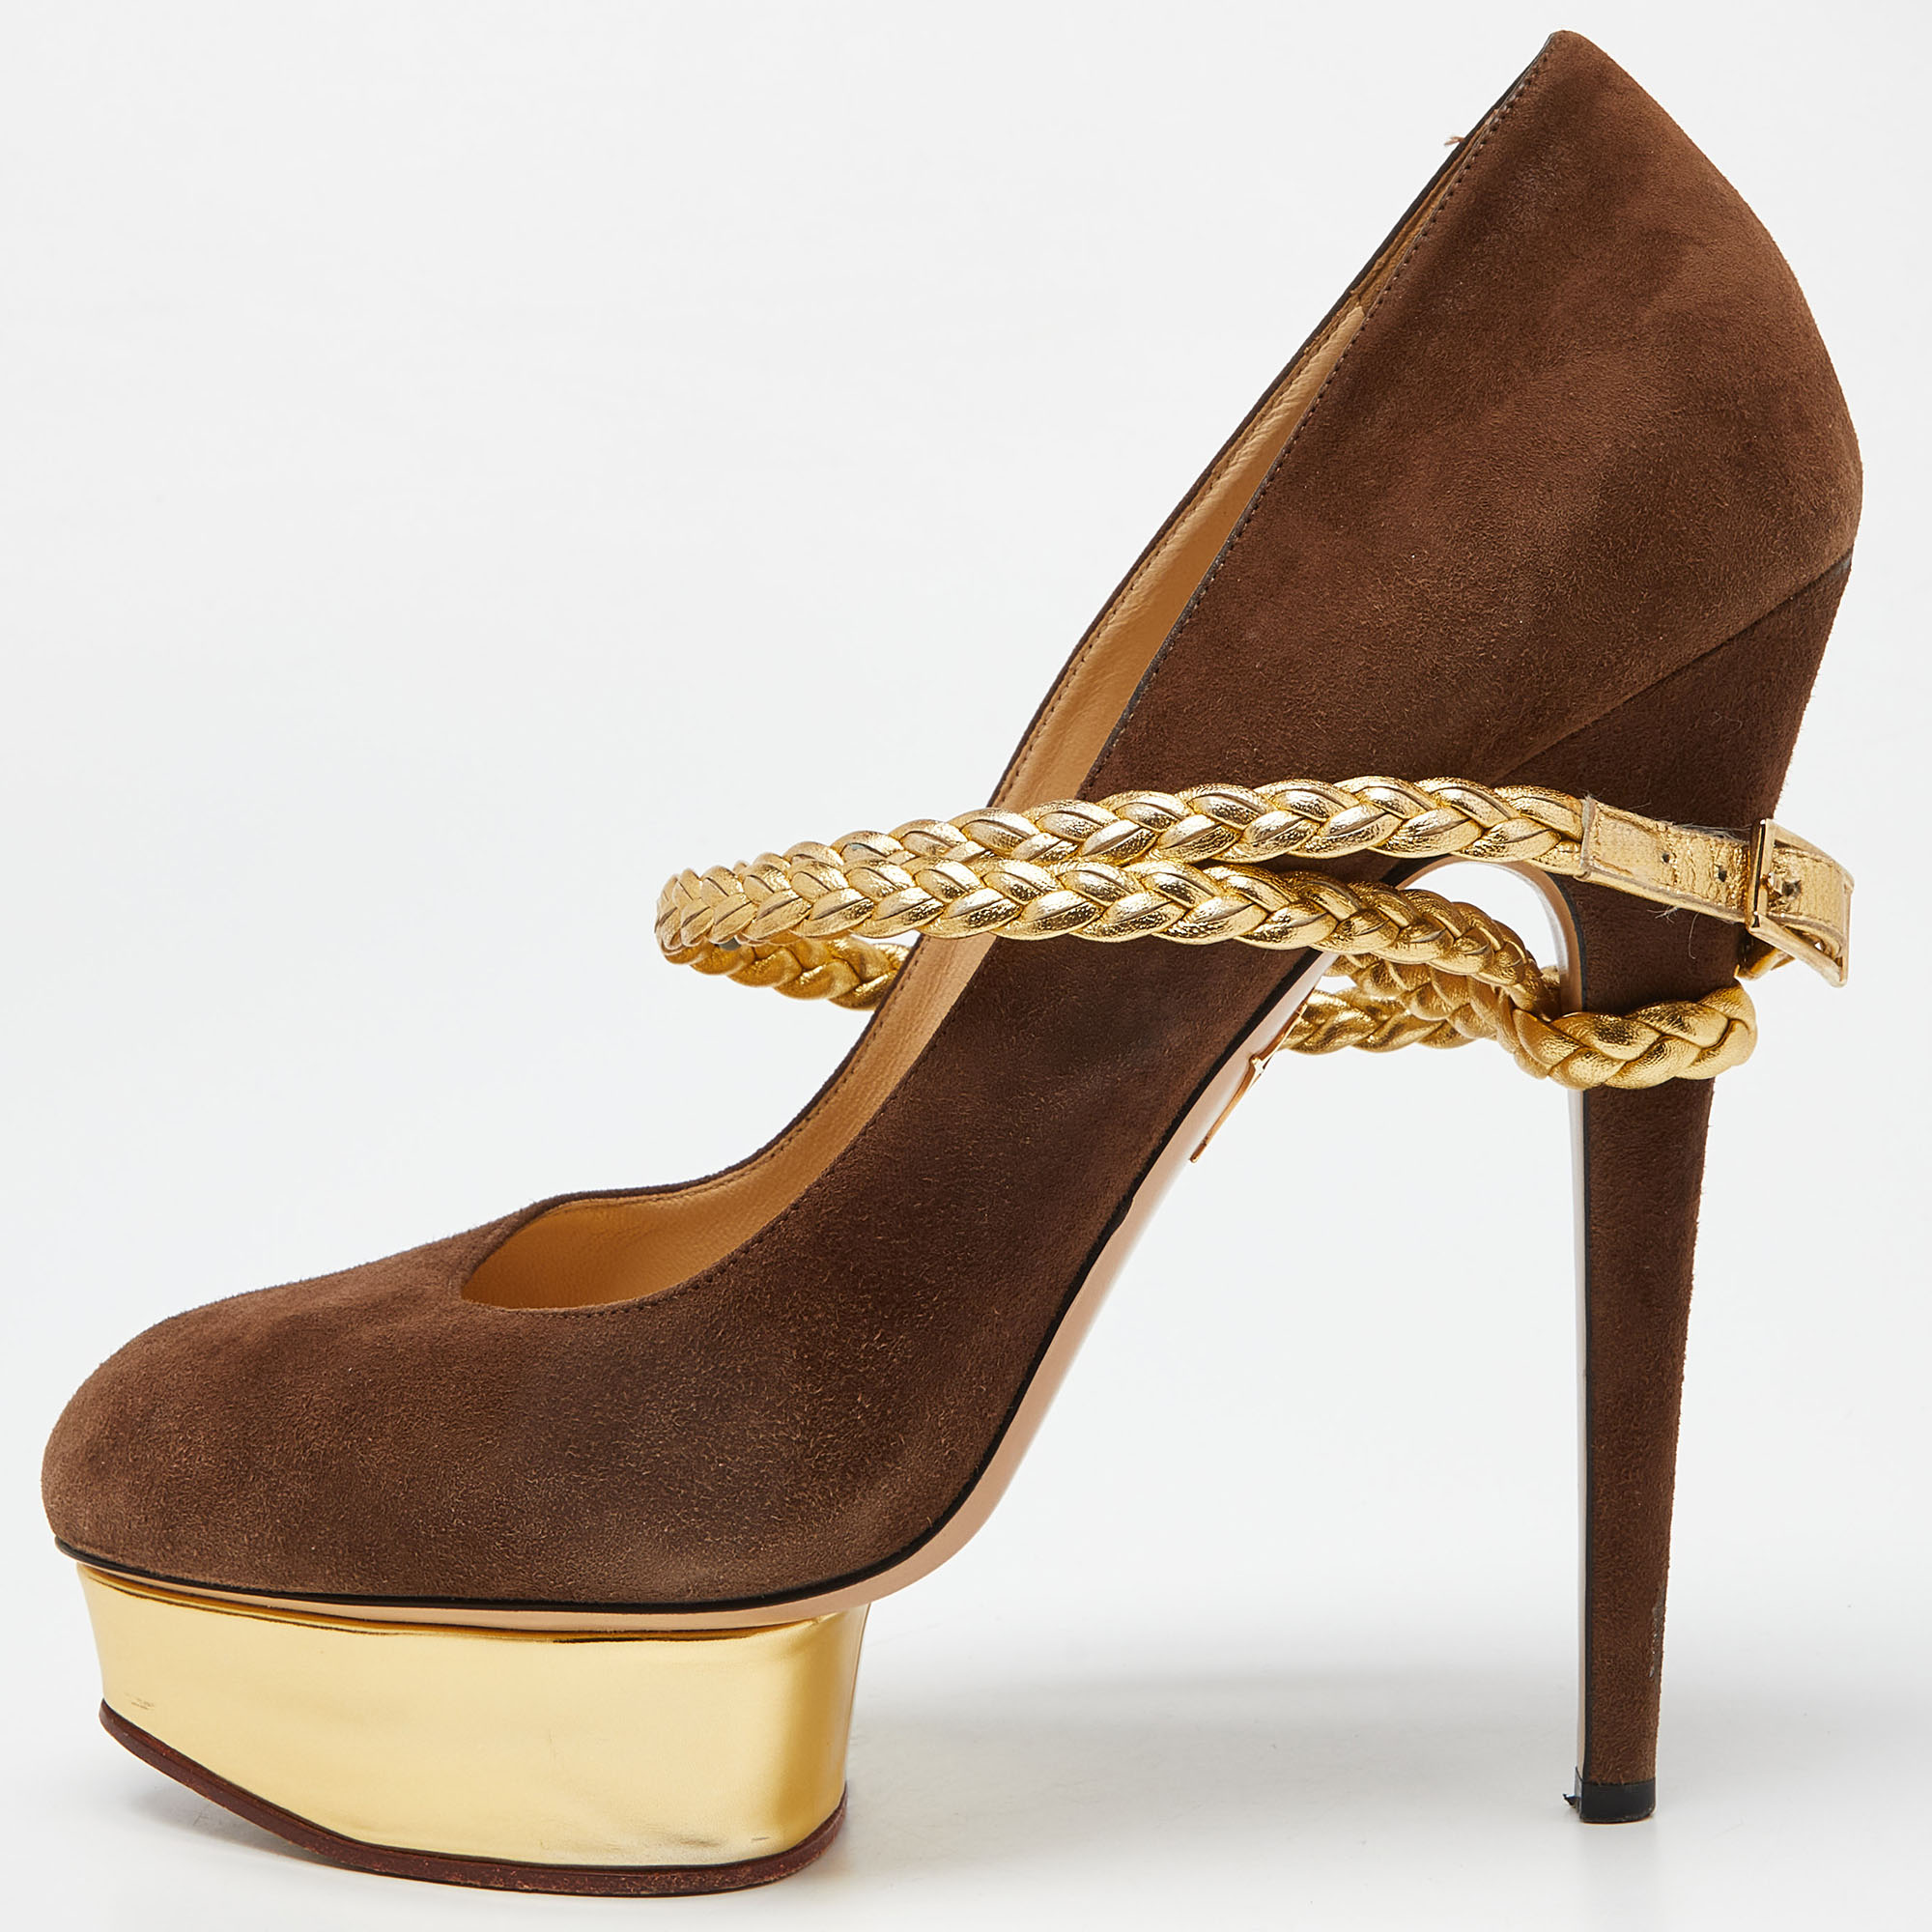 Charlotte olympia brown/gold suede dolly platform pumps size 42